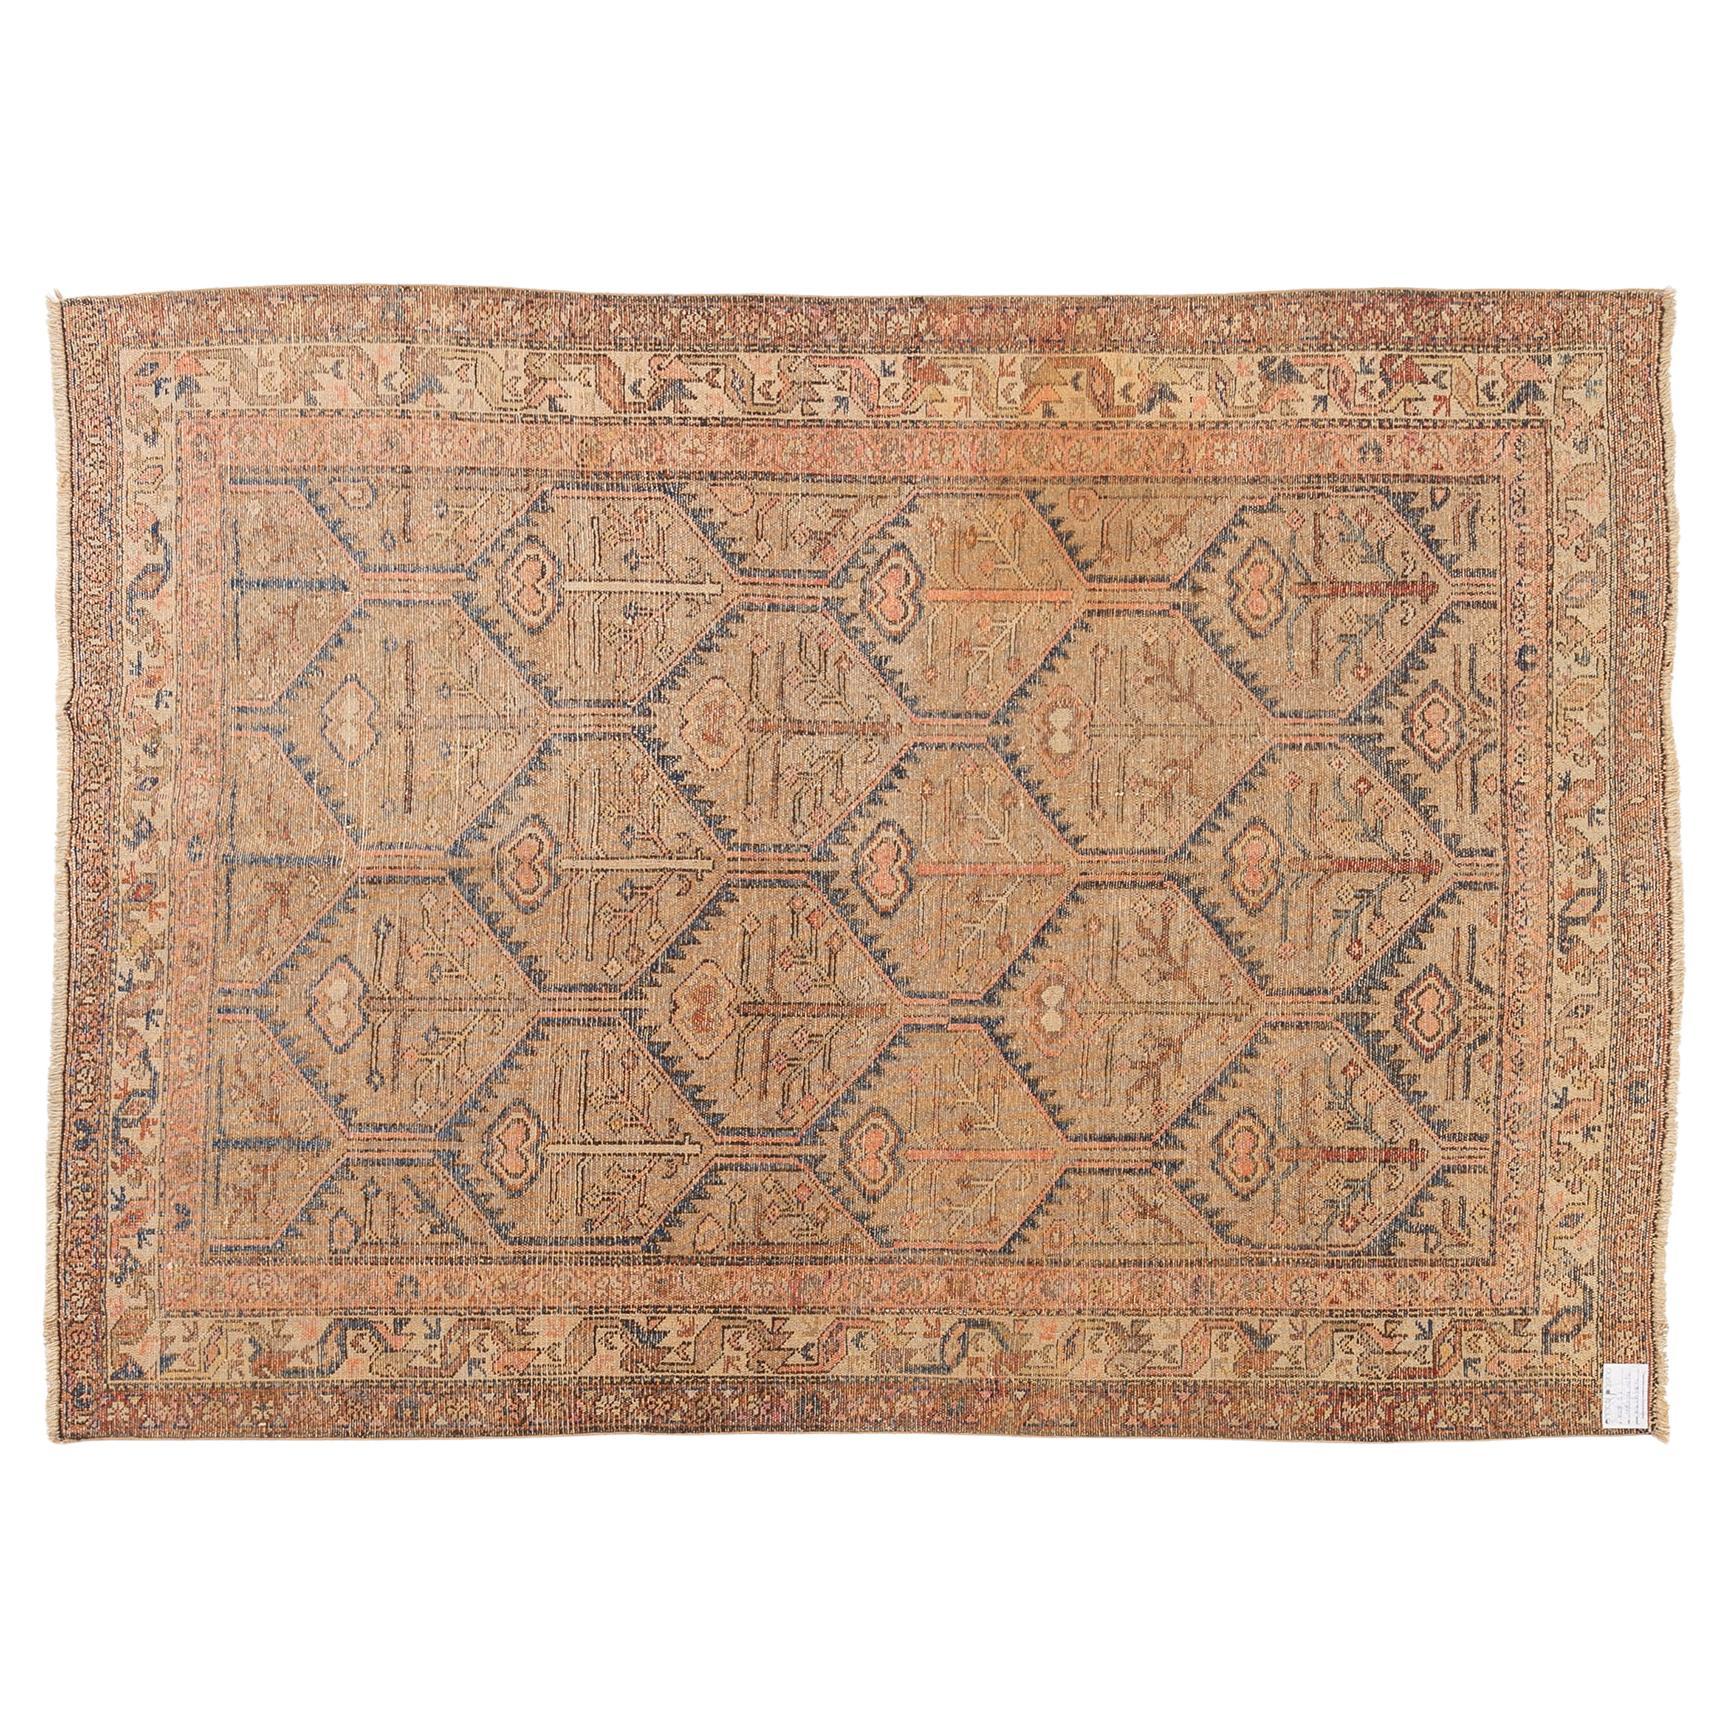 nr. 667 -  Elegant and unusual carpet with camel wool and simple schematic geometric design.
I liked it immediately and kept it in my private collection for many years. It's truly special.